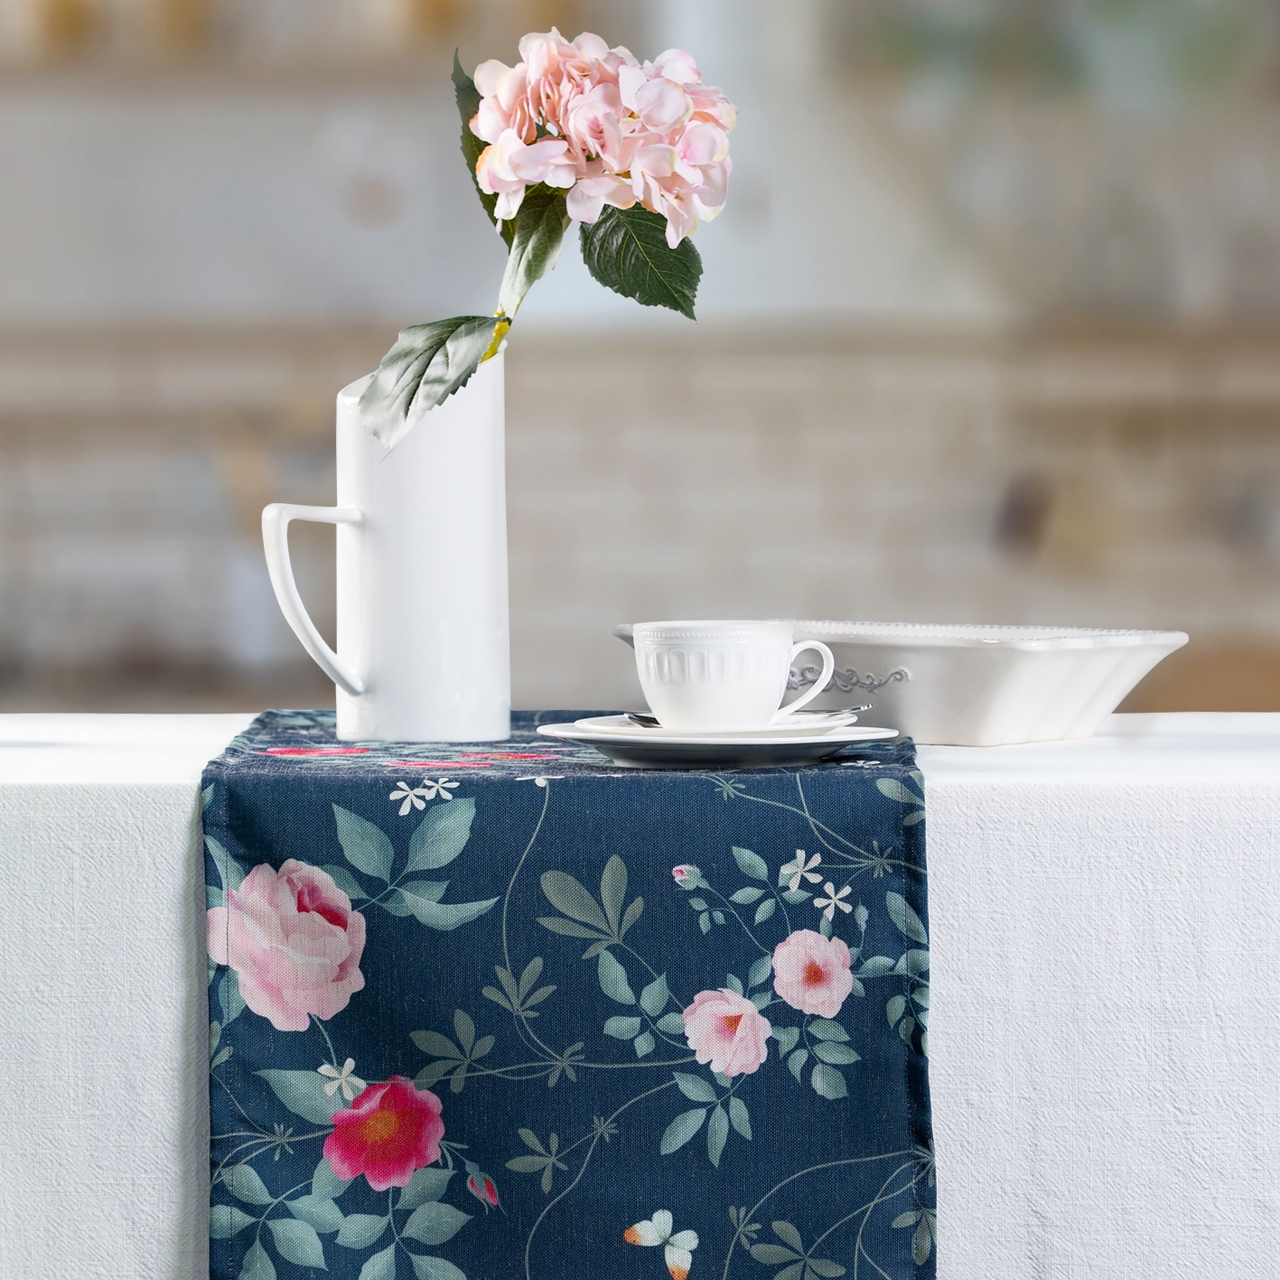 Celina Digby Luxury Eco-Friendly Recycled Linen-Like Fabric Table Runner – Rose Garden Navy Available in 3 Sizes RUNNER 300 x 40cm